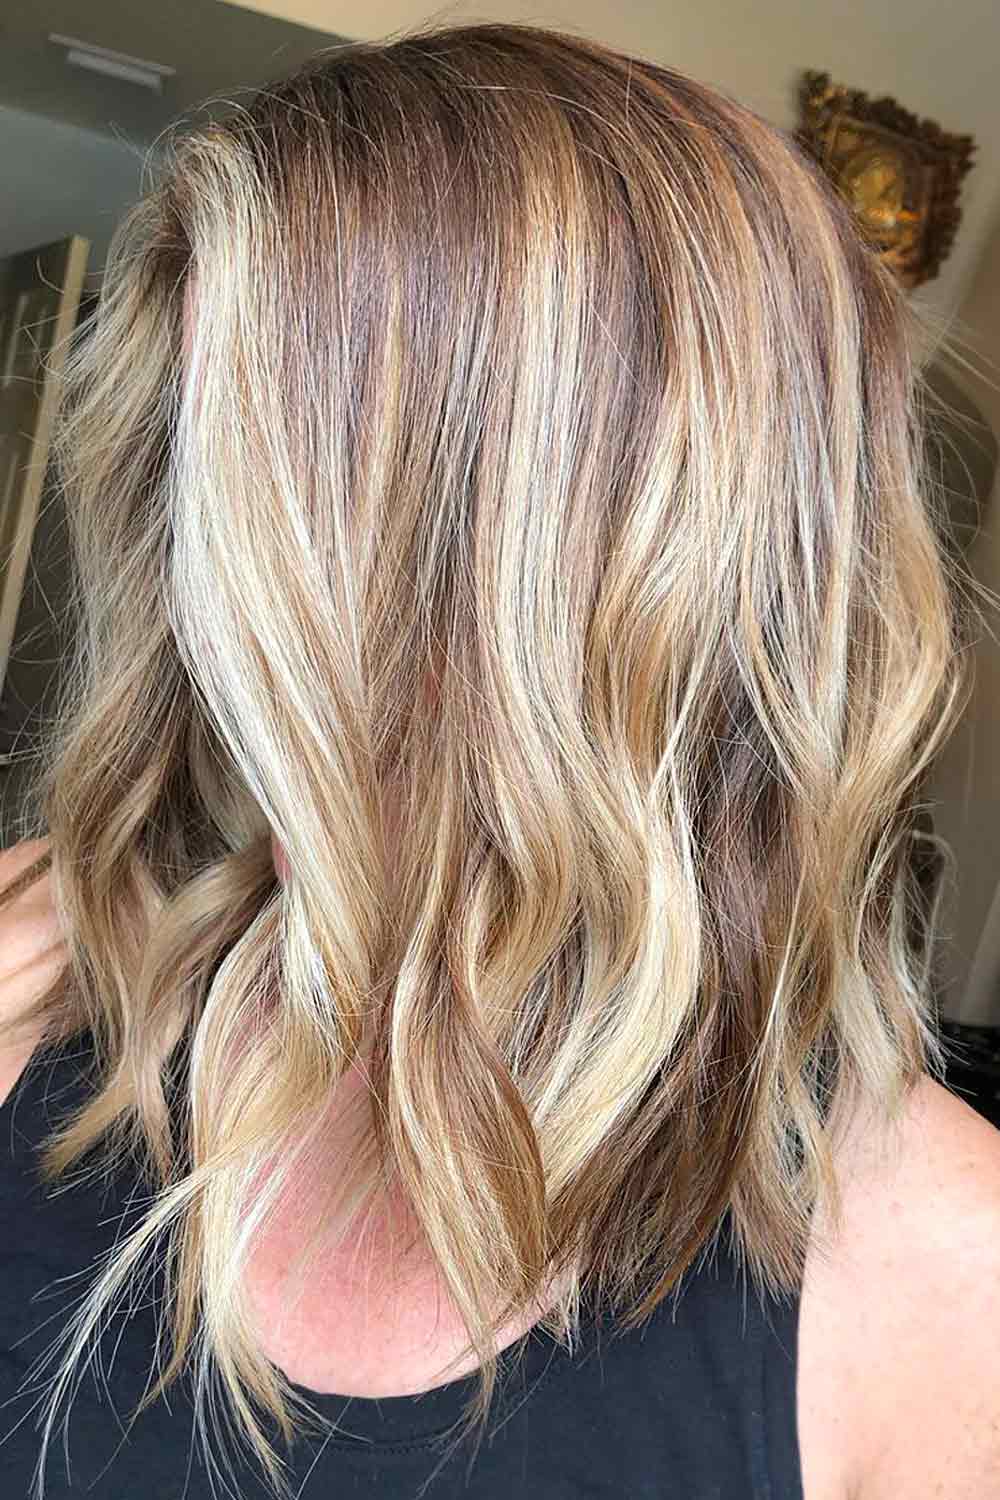 Bronde Balayage with Money Pieces #mediumhairbalayage #balayagehairstyles #mediumhair #balayage